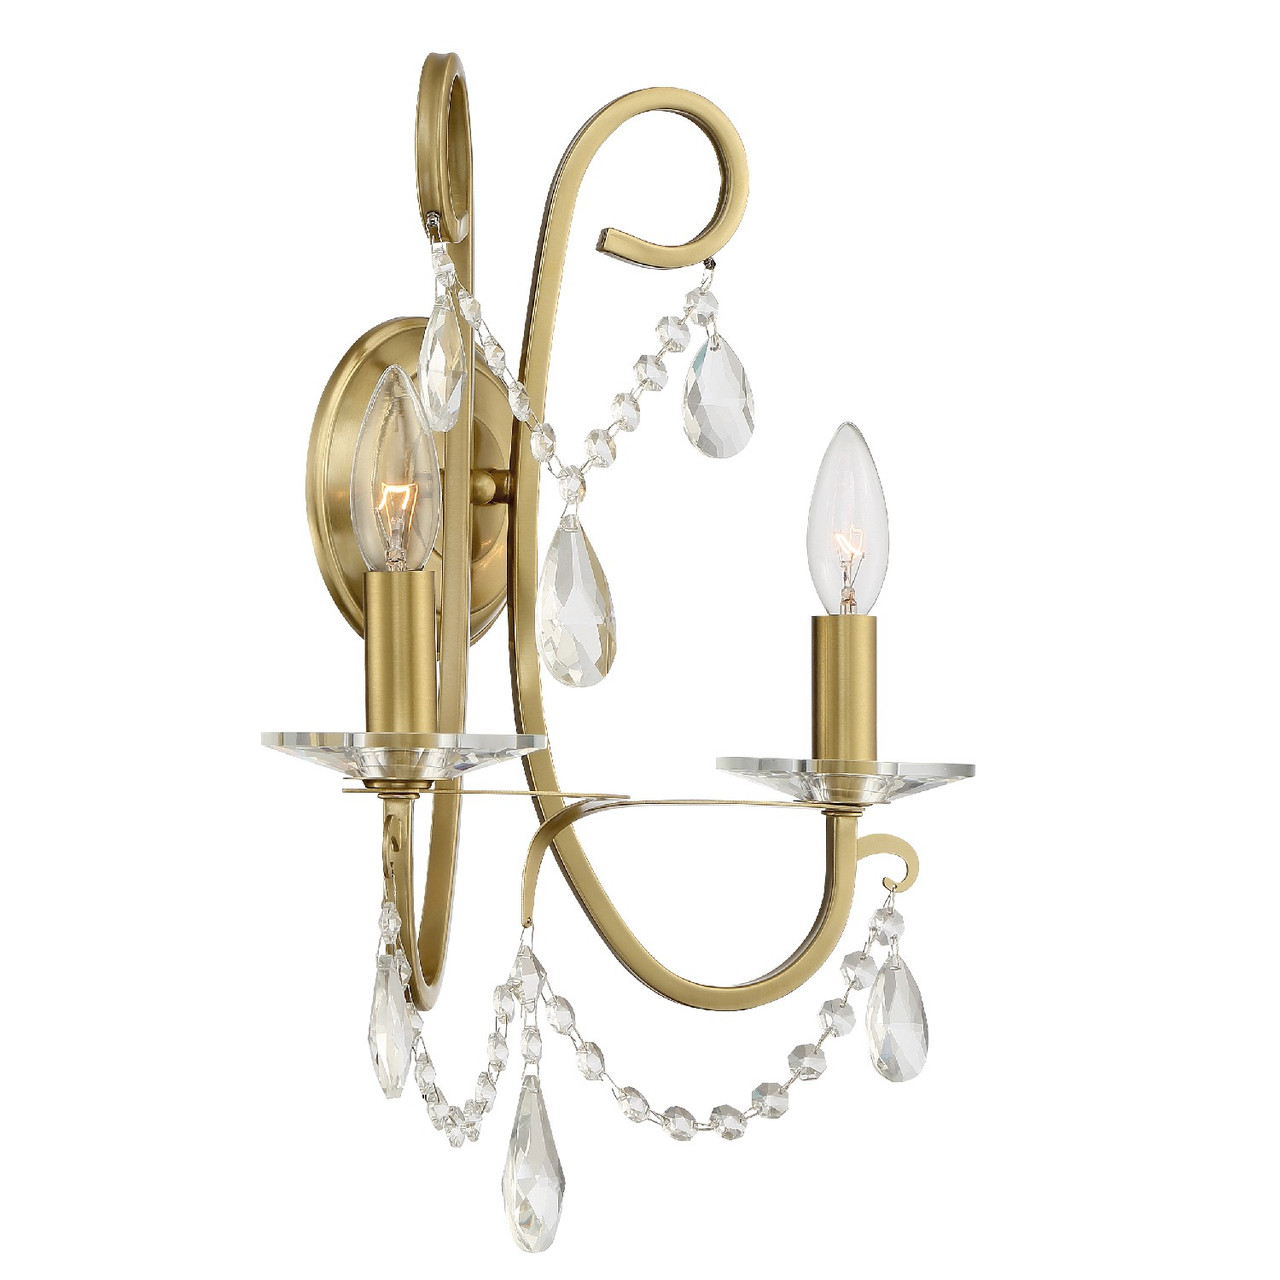 CRYSTORAMA 6822-VG-CL-MWP Othello 2 Light Vibrant Gold Wall Mount